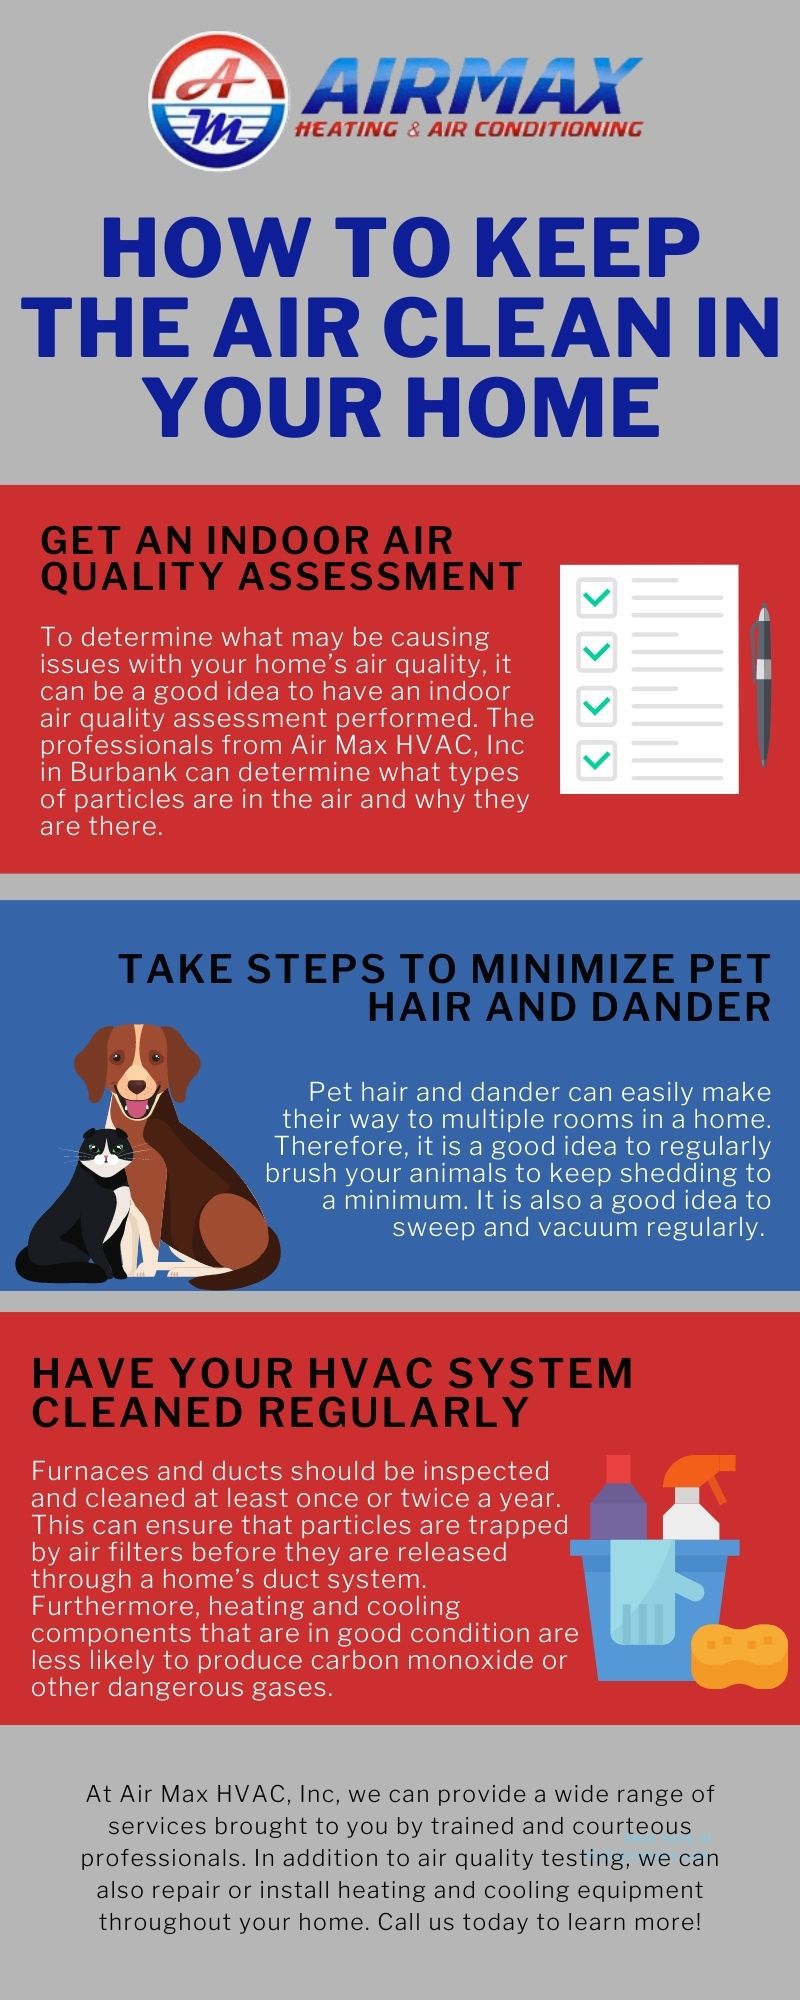 How to Keep the Air Clean in Your Home